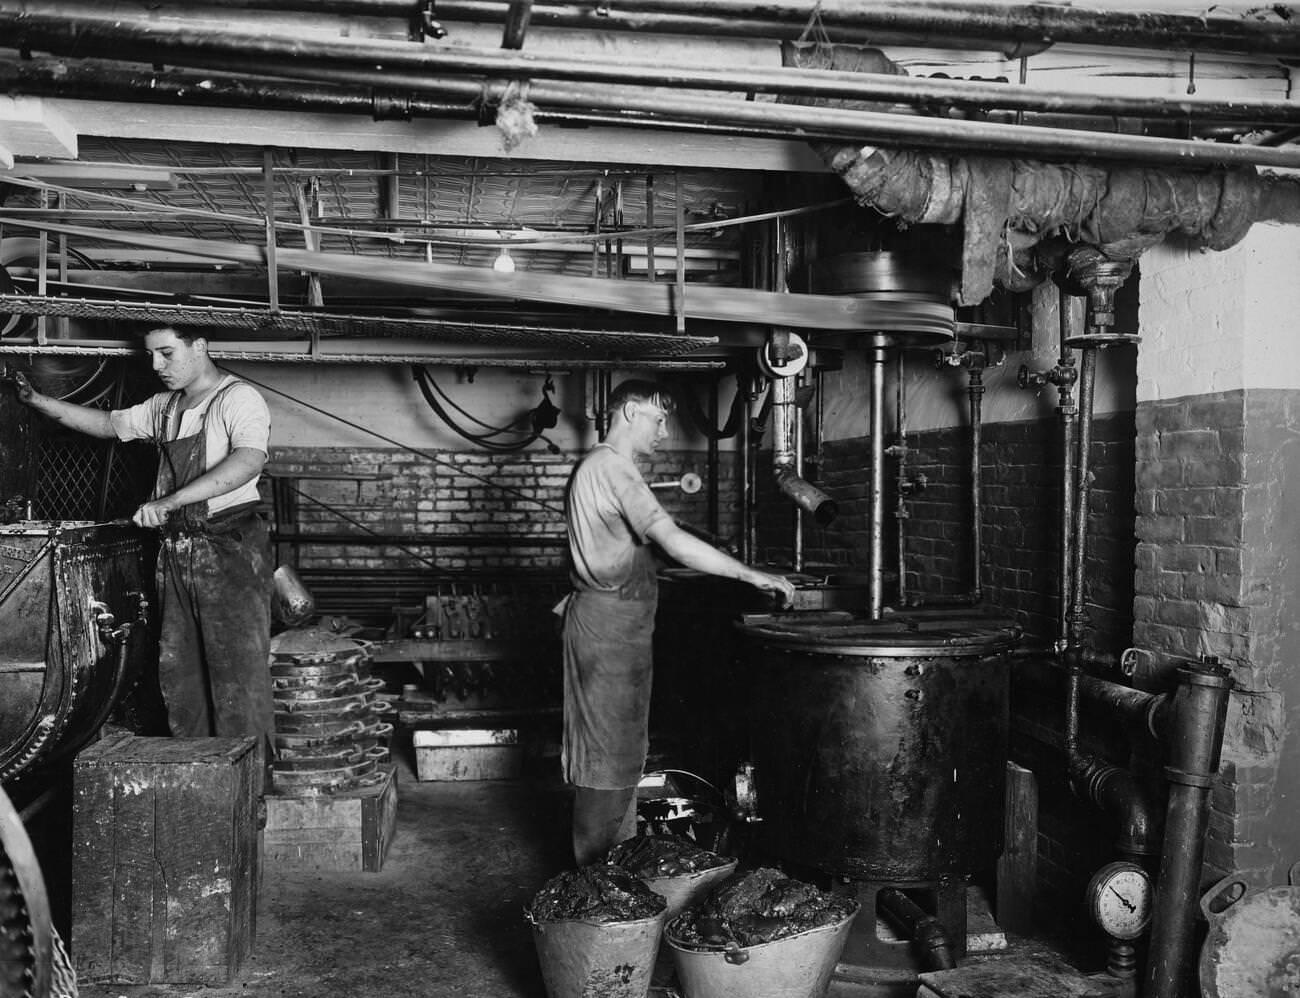 Cocoa And Chocolate Manufacturing For Government At Dean Street, Brooklyn, 1900S